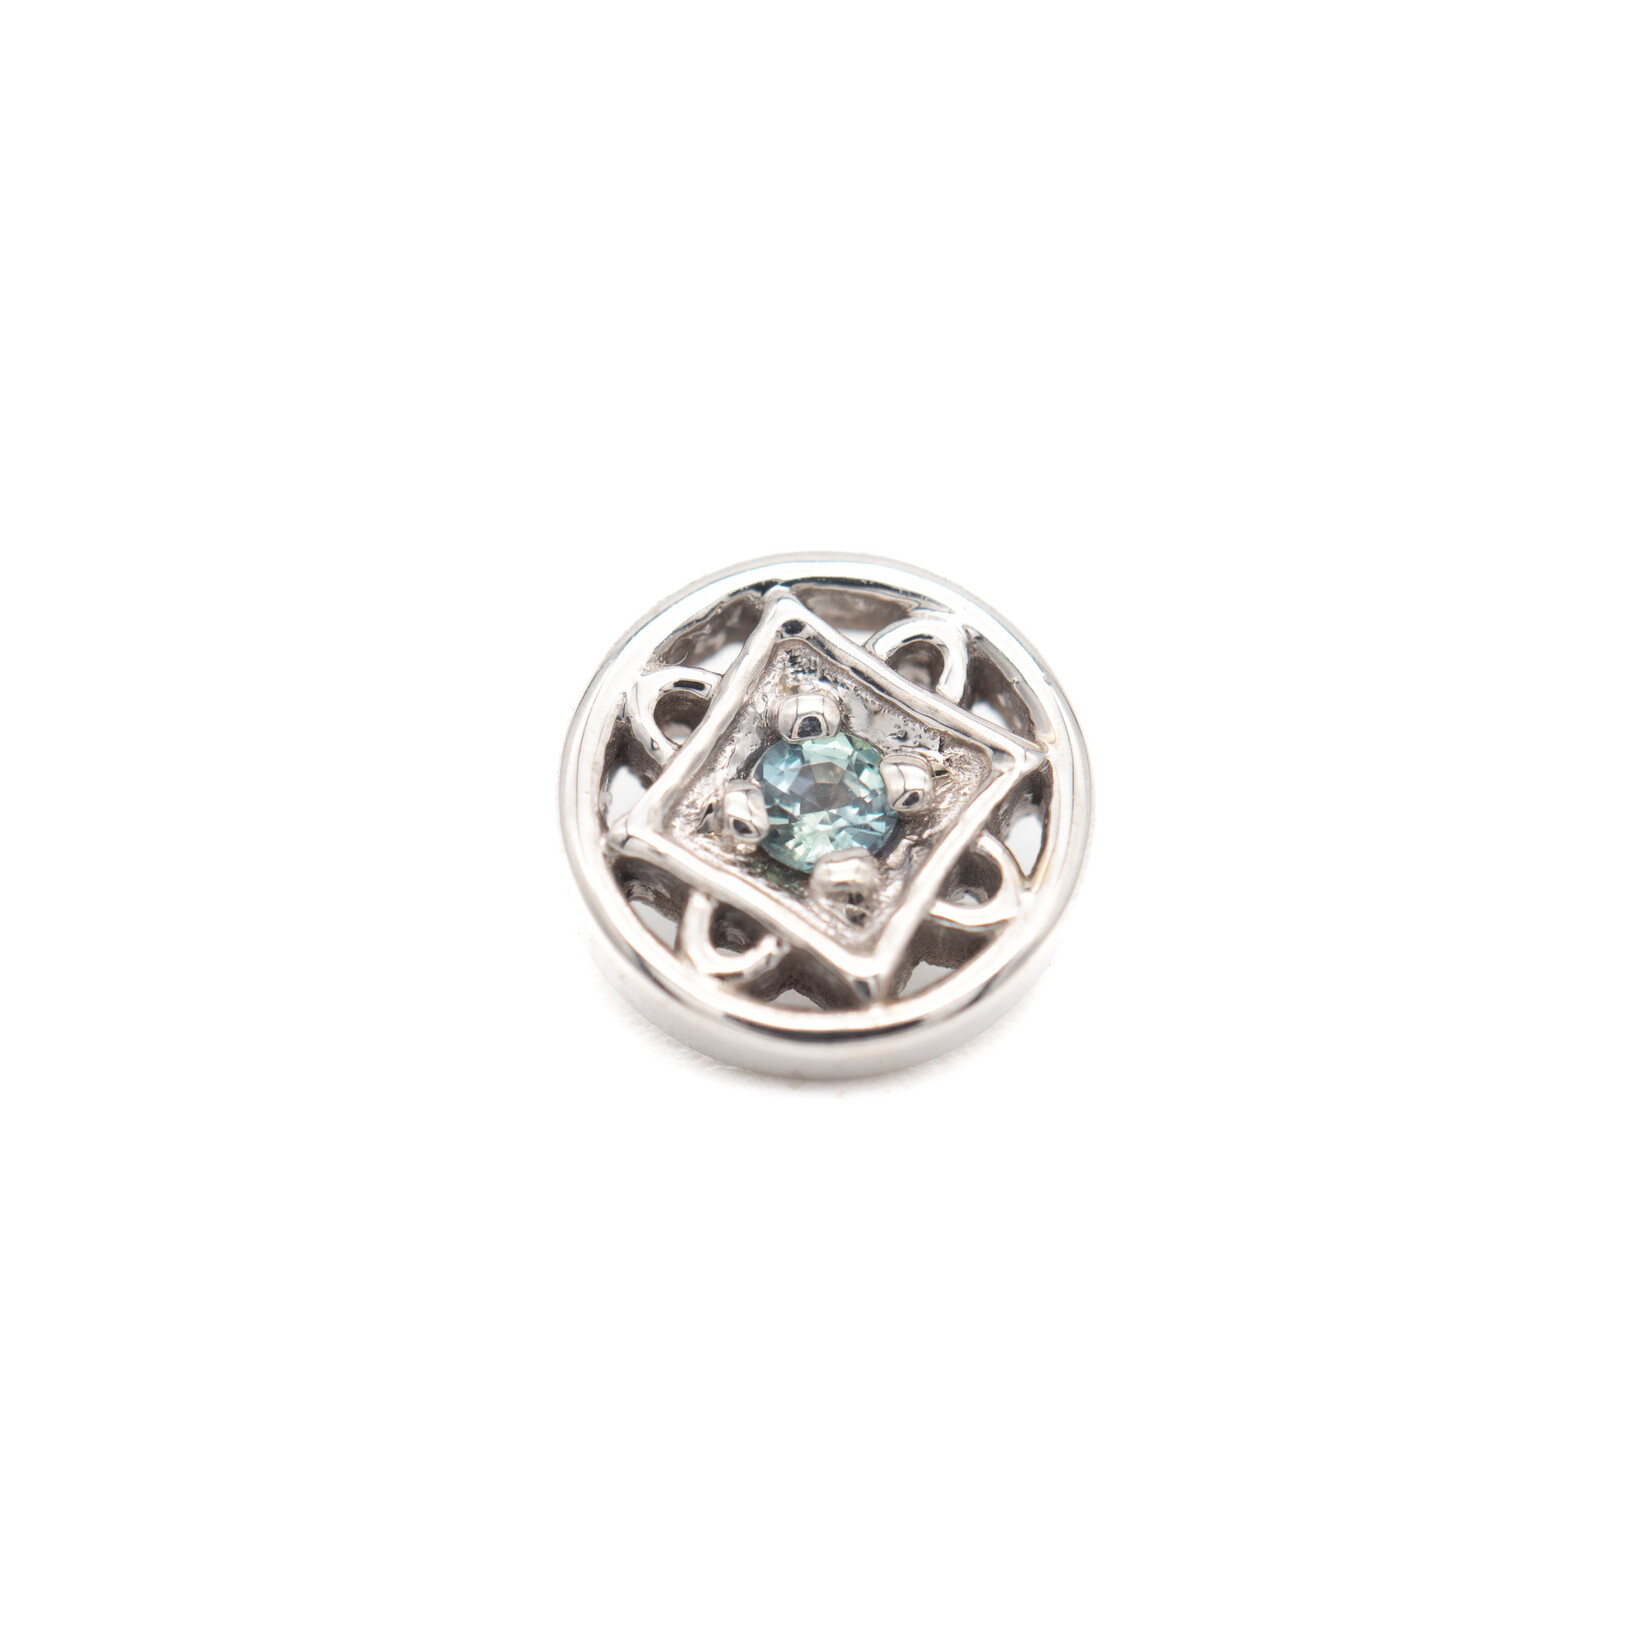 BVLA WG 18/16g Threaded Paloma Square with Alexandrite